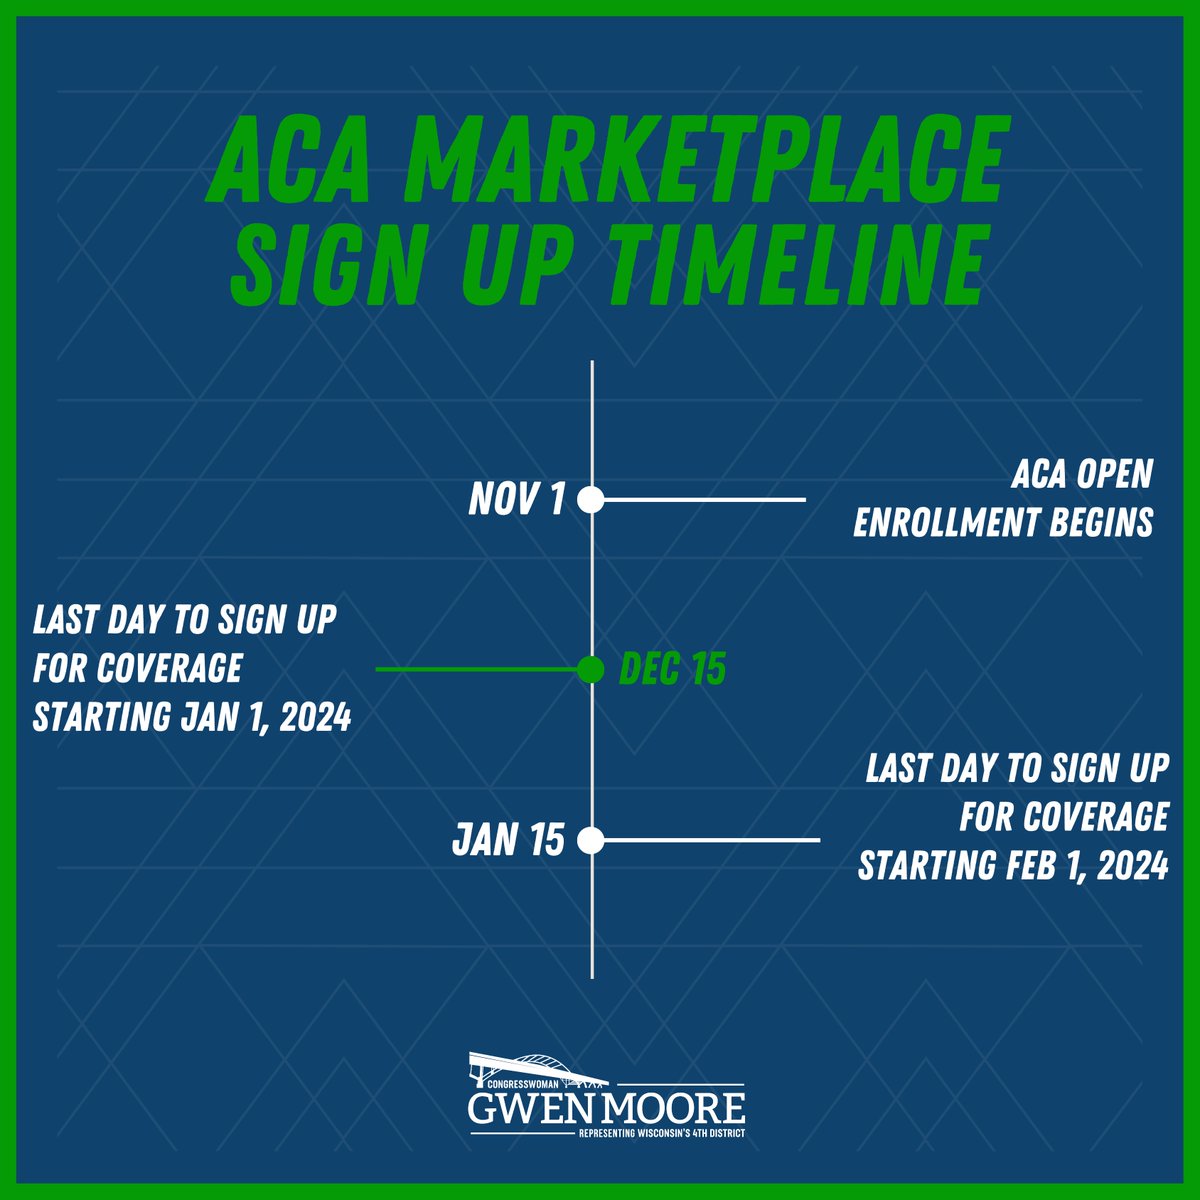 Thanks to Democrats’ efforts to lower health care costs for American families, the #ACA marketplaces are more affordable than ever! Enrollment runs NOW through DEC 15 for coverage starting JAN 1, 2024; with a final deadline of JAN 15, 2024 for coverage starting FEB 1, 2024.